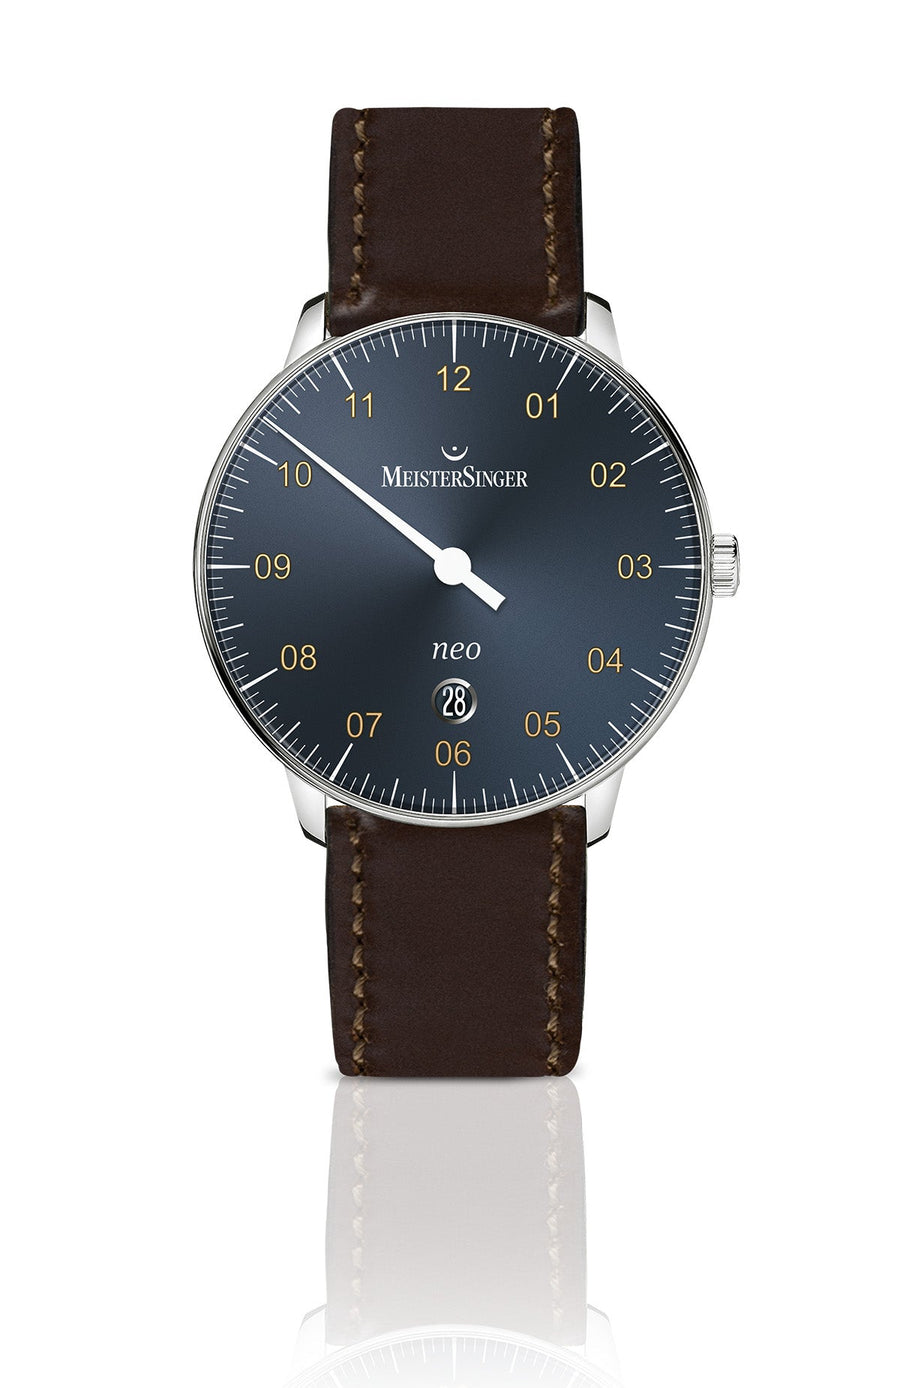 MeisterSinger : Neo Plus - The Independent Collective